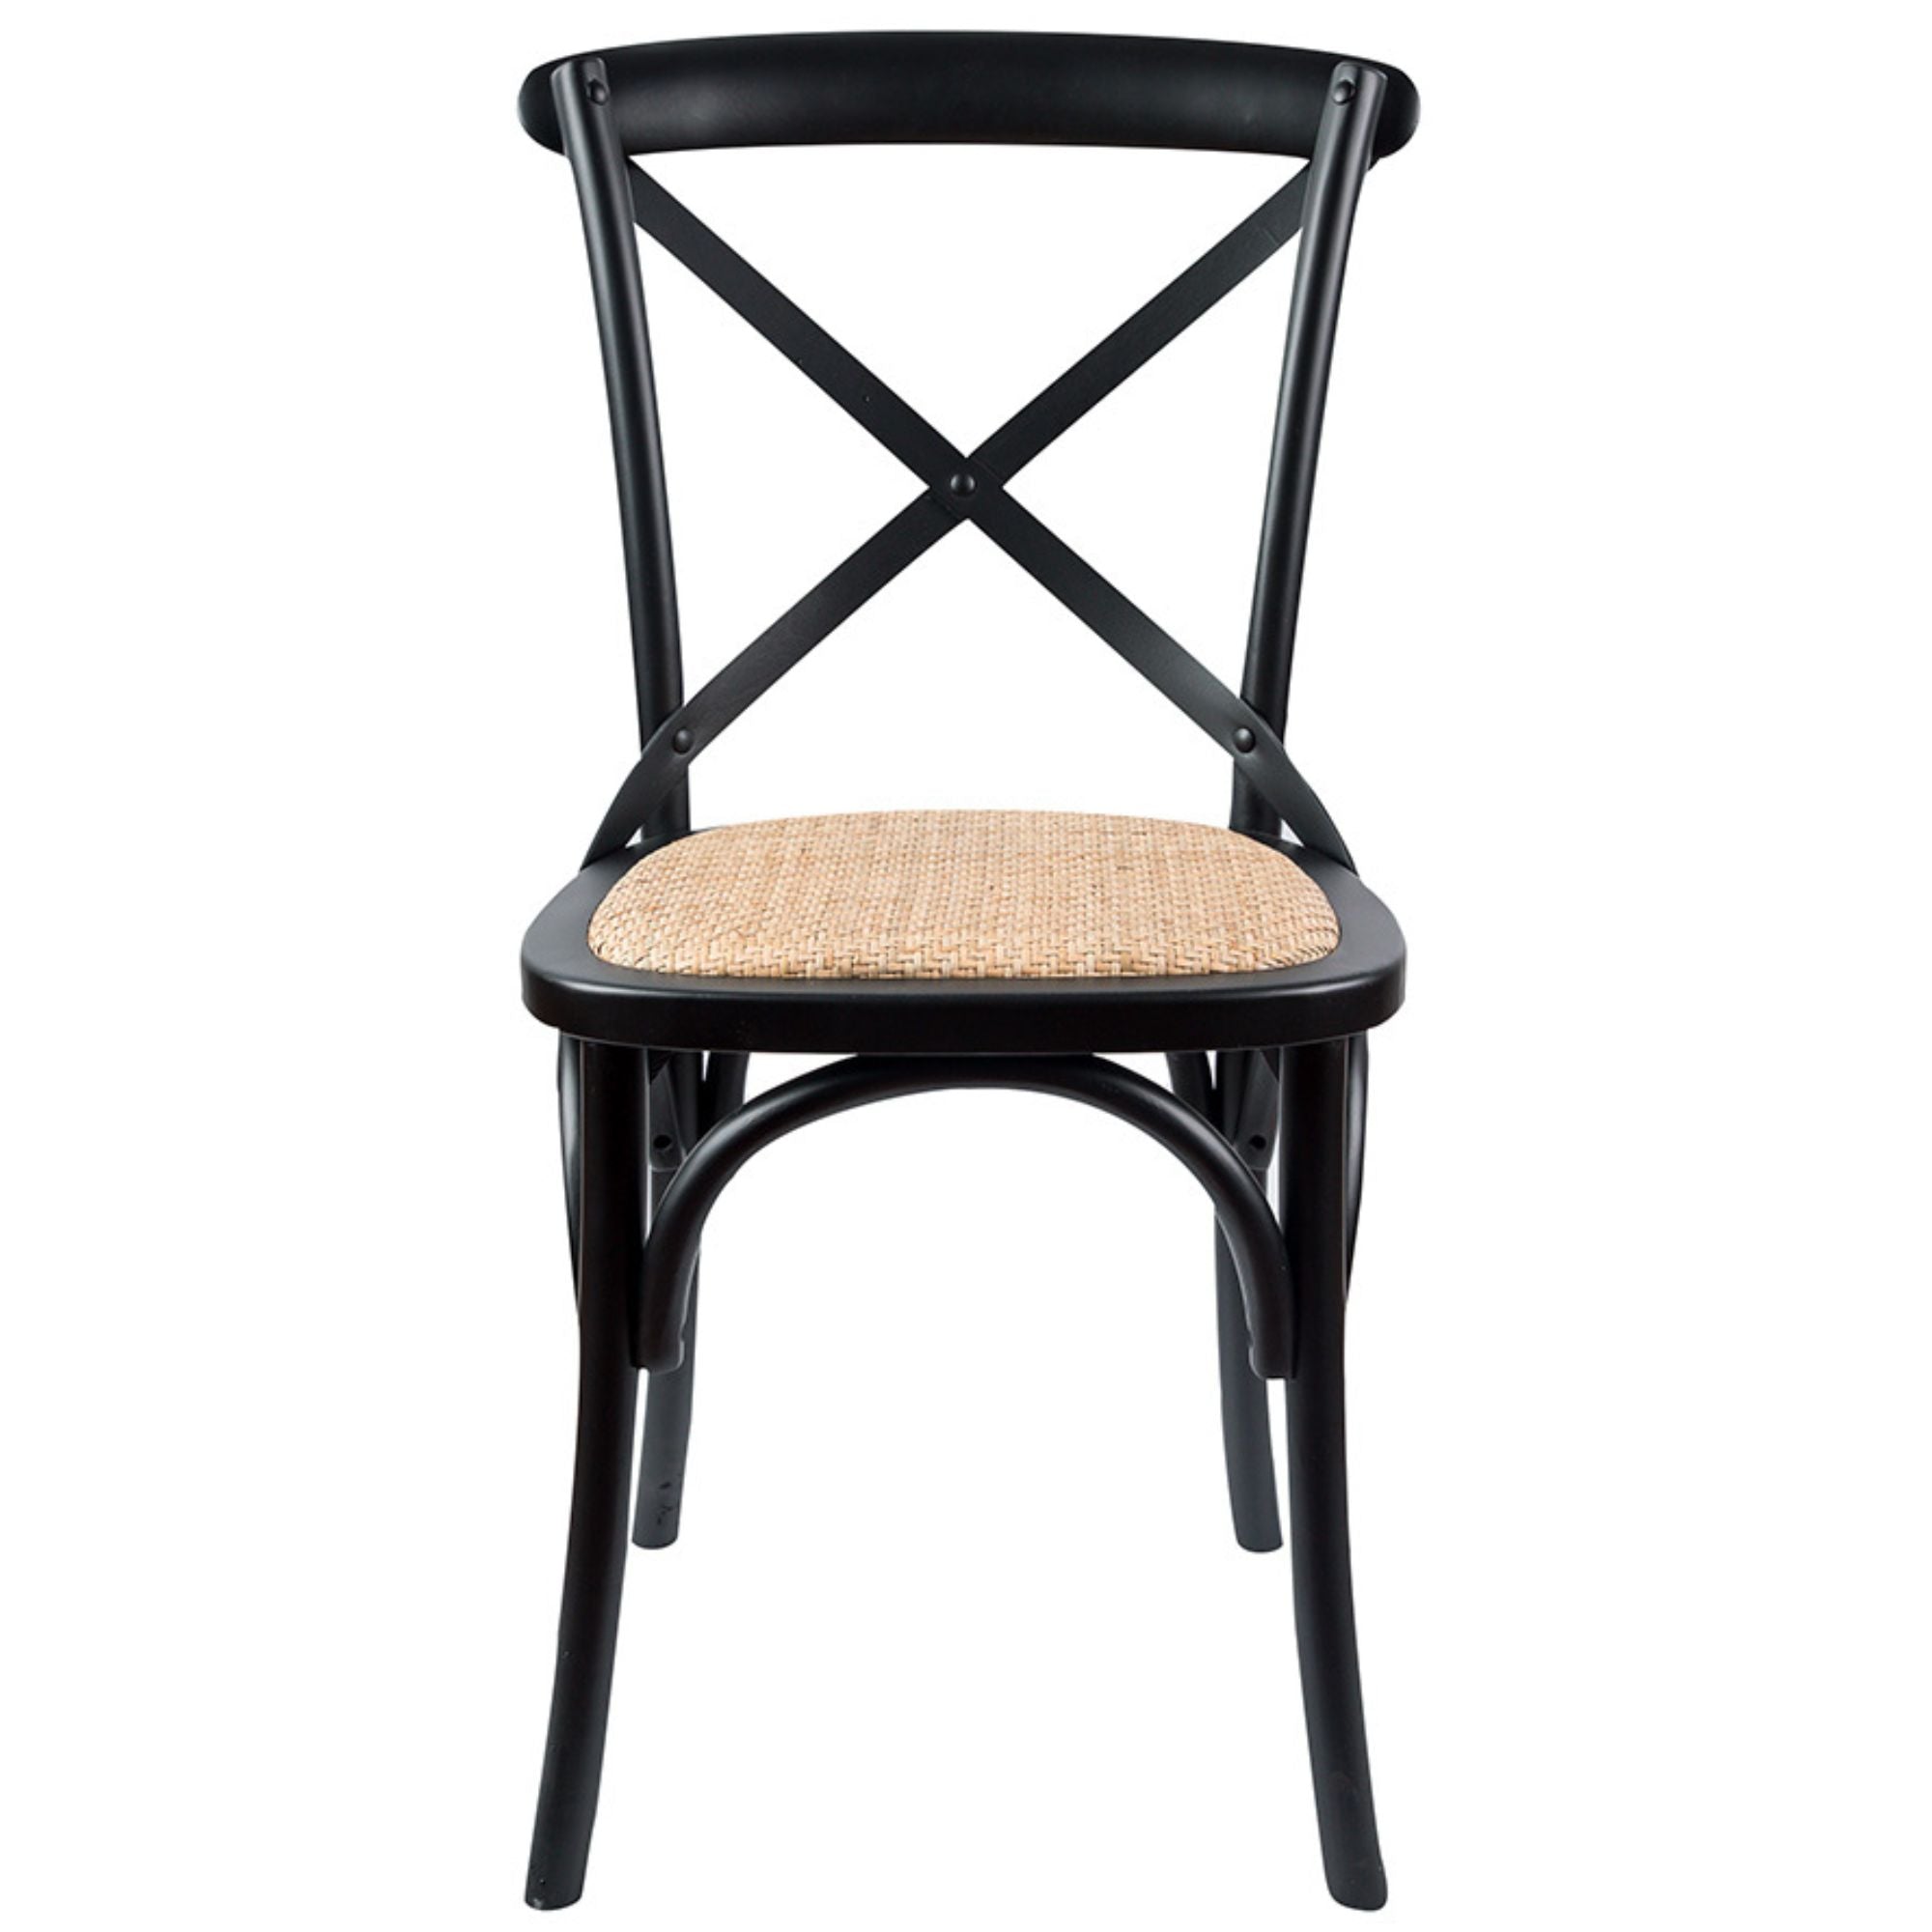 Aster Crossback Dining Chair Set of 2 Solid Birch Timber Wood Ratan Seat - Black Deals499